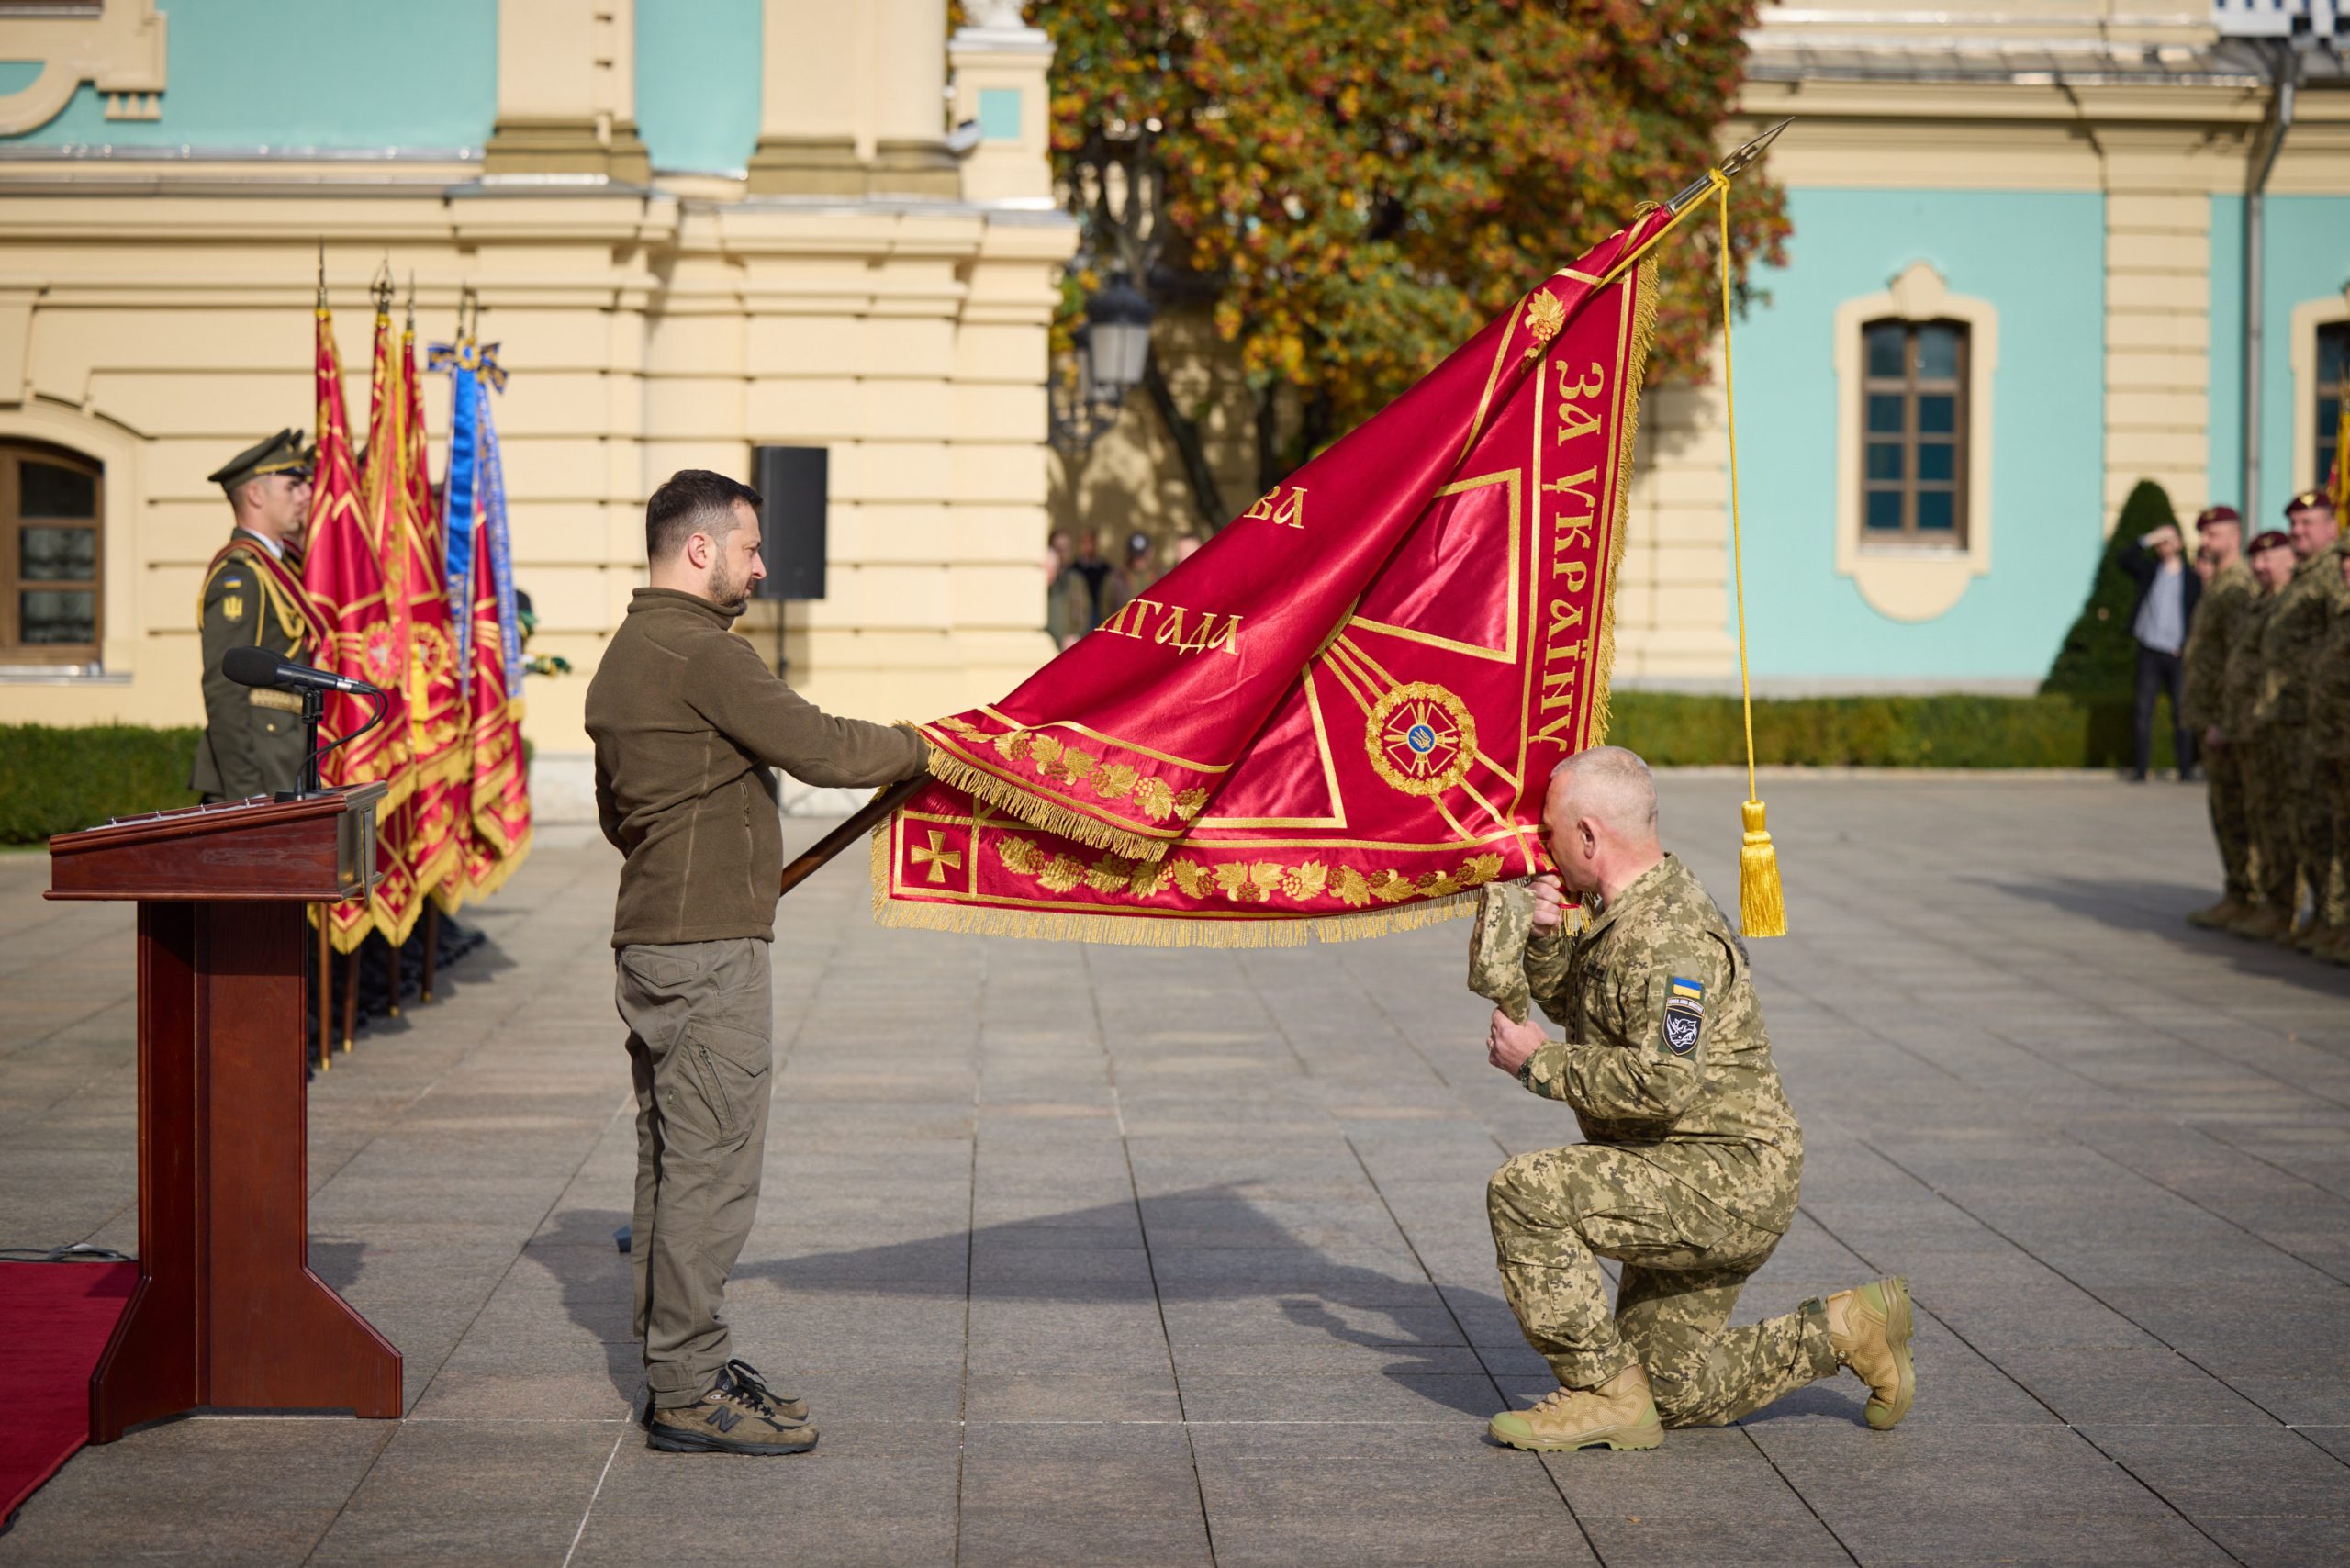 Photo: President Volodymyr Zelenskyy took part in events on the occasion of the Day of Defenders of Ukraine. Credit: President of Ukraine via Flickr. https://flic.kr/p/2nTHXH3